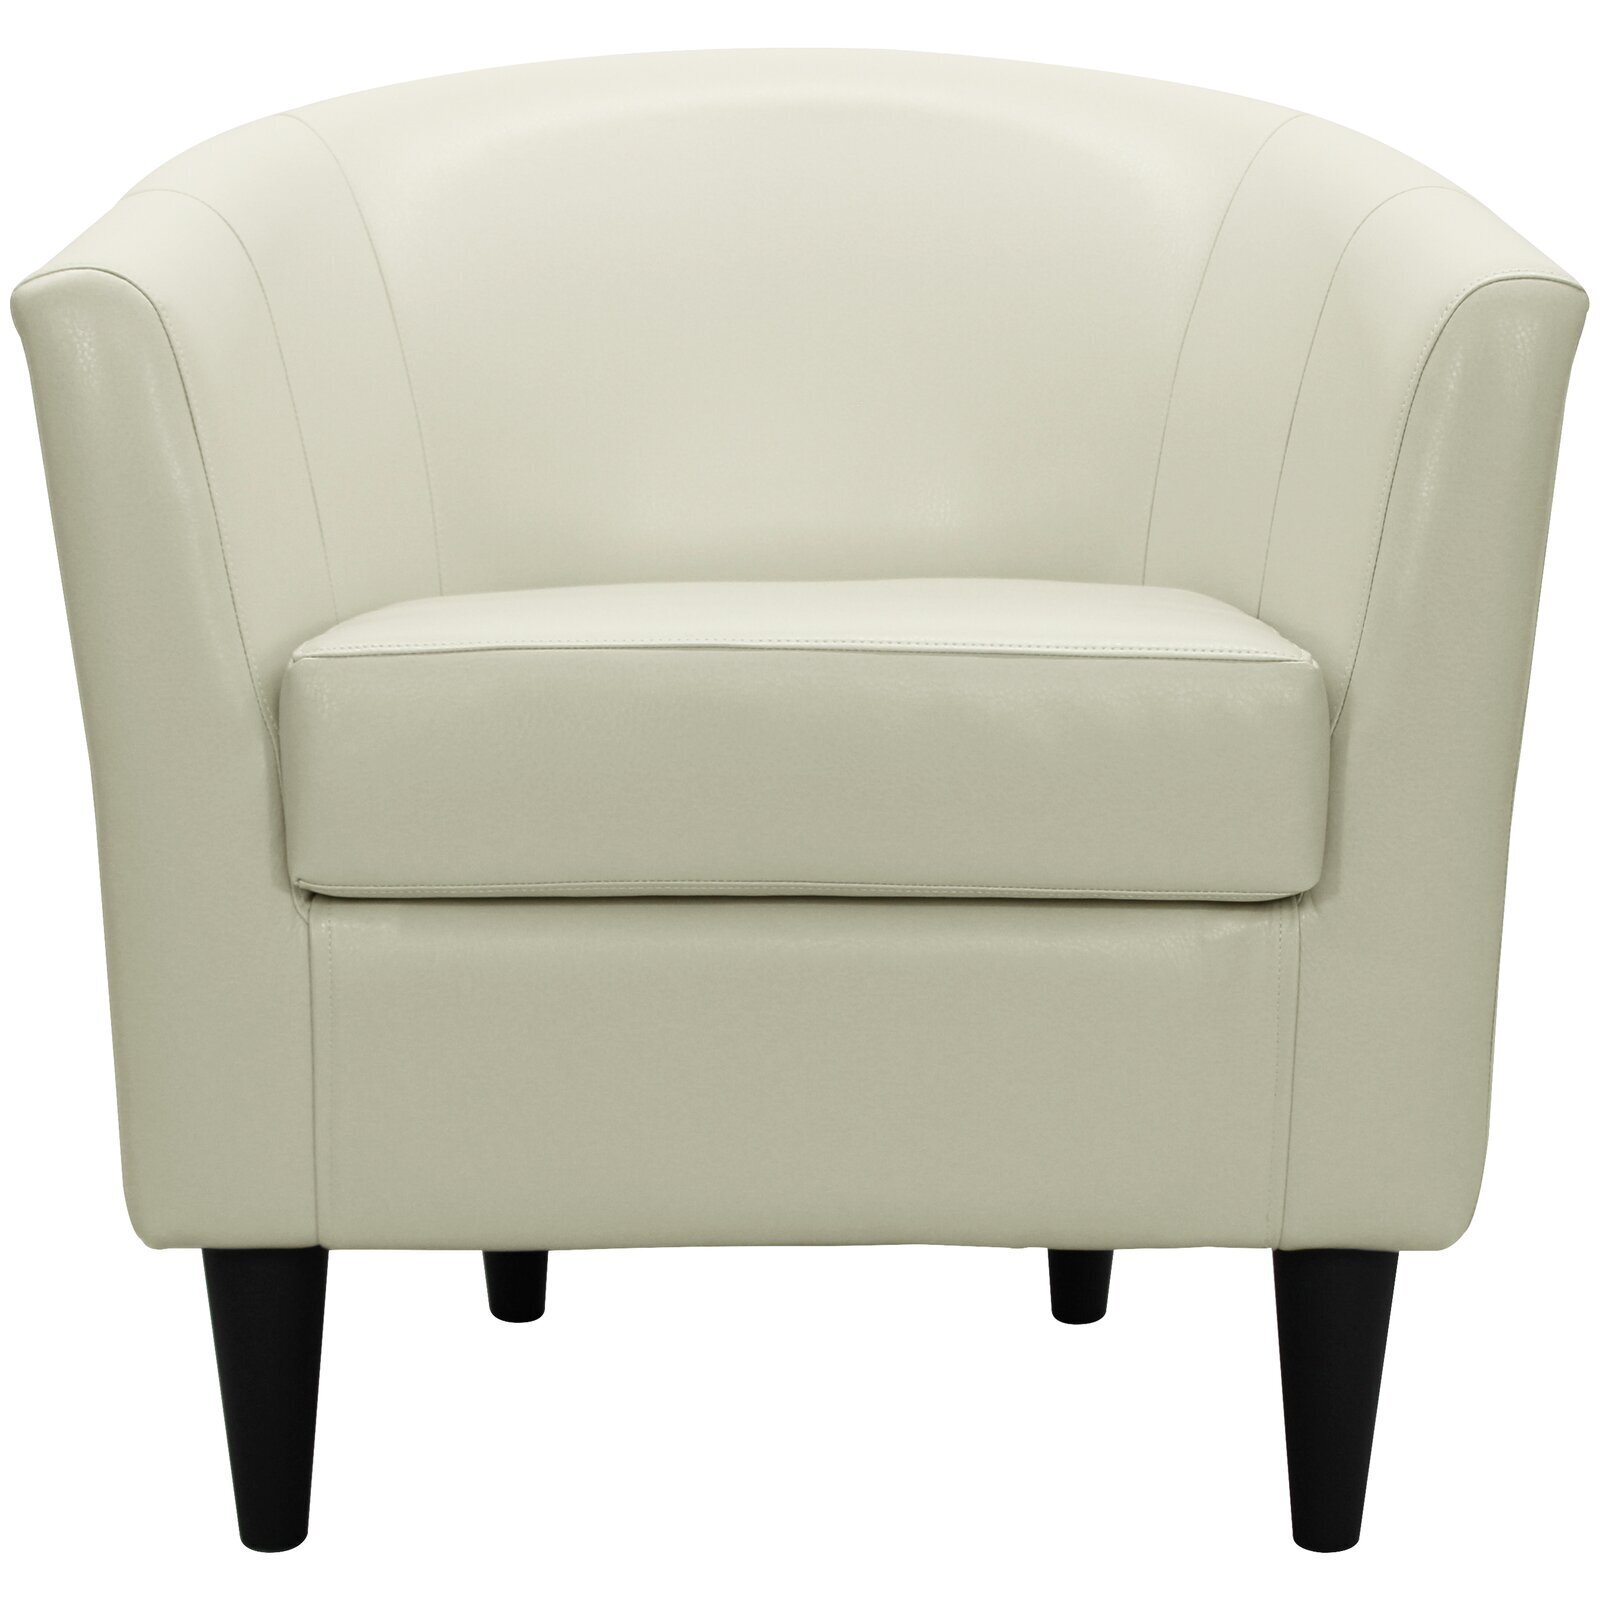 Small White Leather Barrel Chair